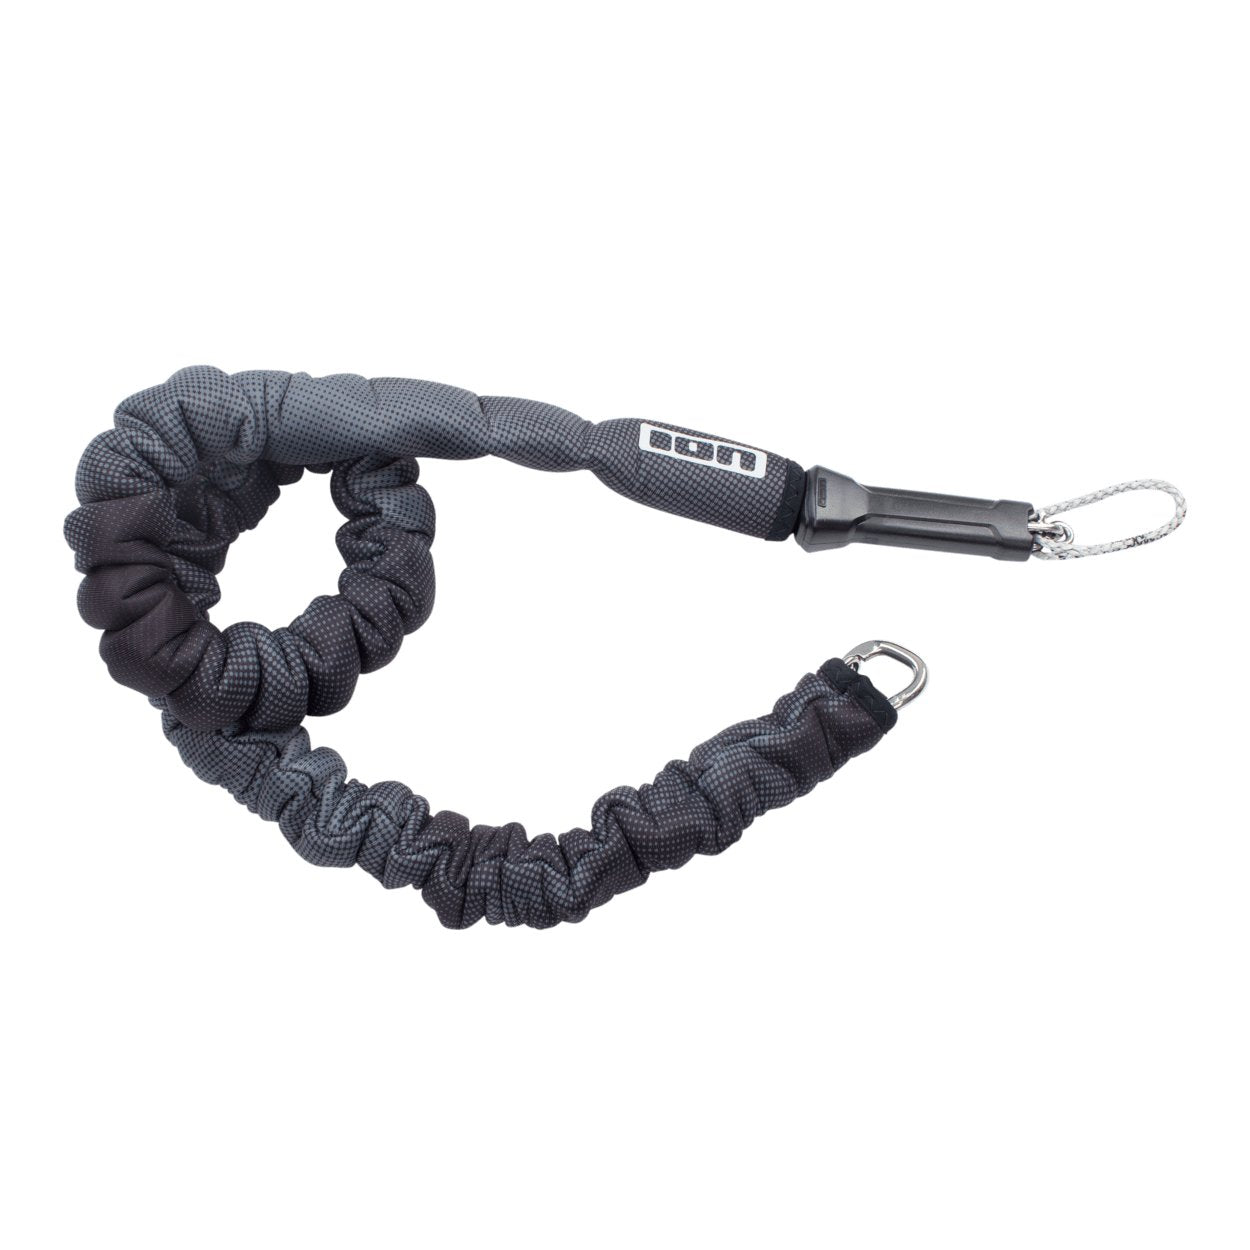 ION Handle Pass Leash Comp 2022 - Worthing Watersports - 9008415868469 - Accessories - ION Water